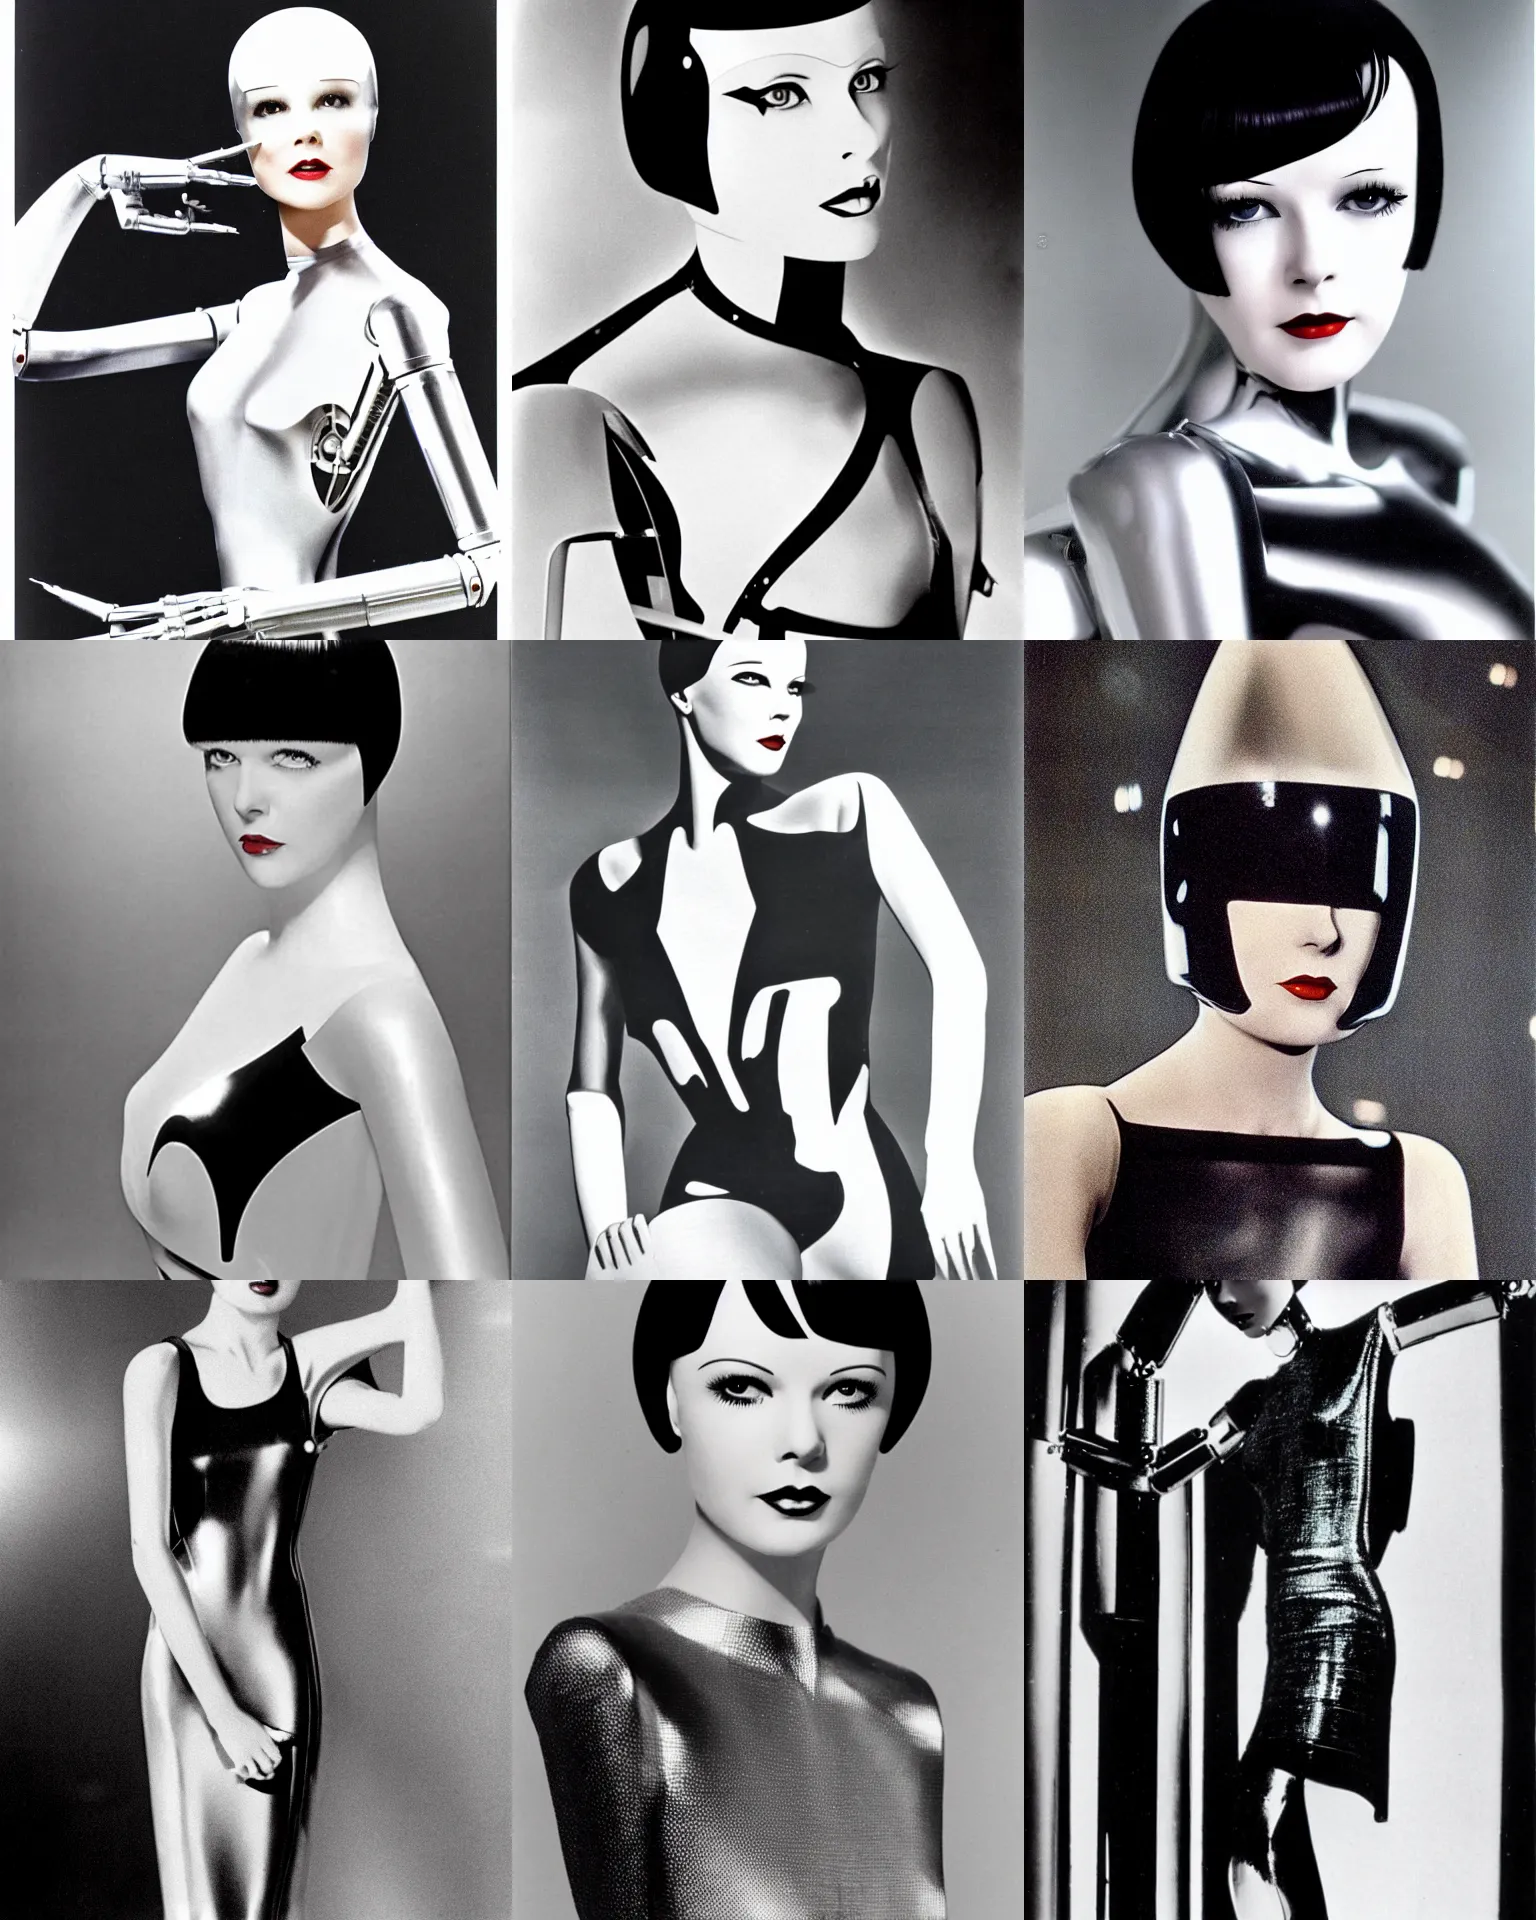 Prompt: mary louise brooks is half robot, chrome skin, 1 9 8 0 s airbrush, clean lines, futuristic, blade runner, dress made with circuit tracks